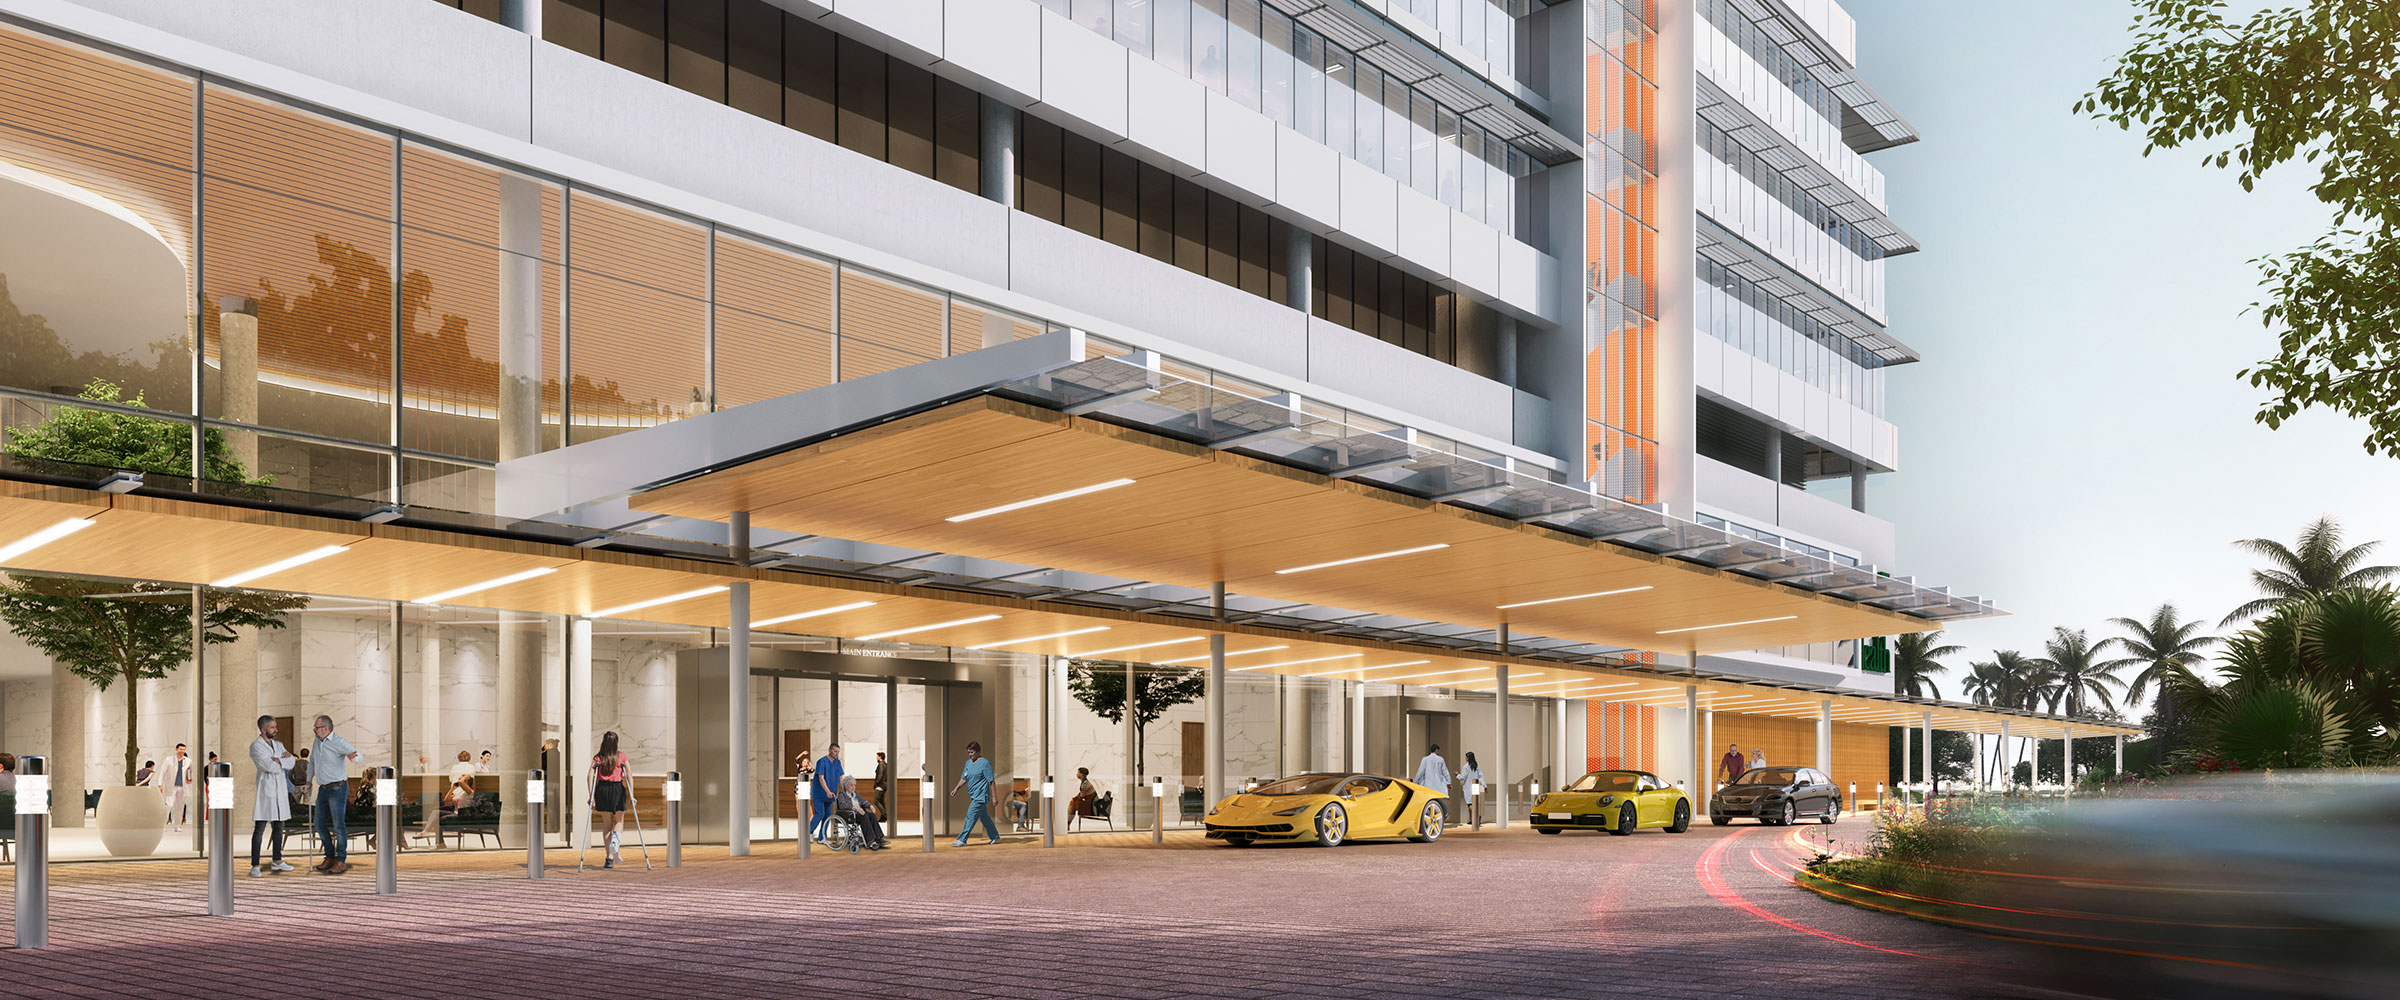 Drop-off Architectural Rendering of UHealth at SoLé Mia in Aventura